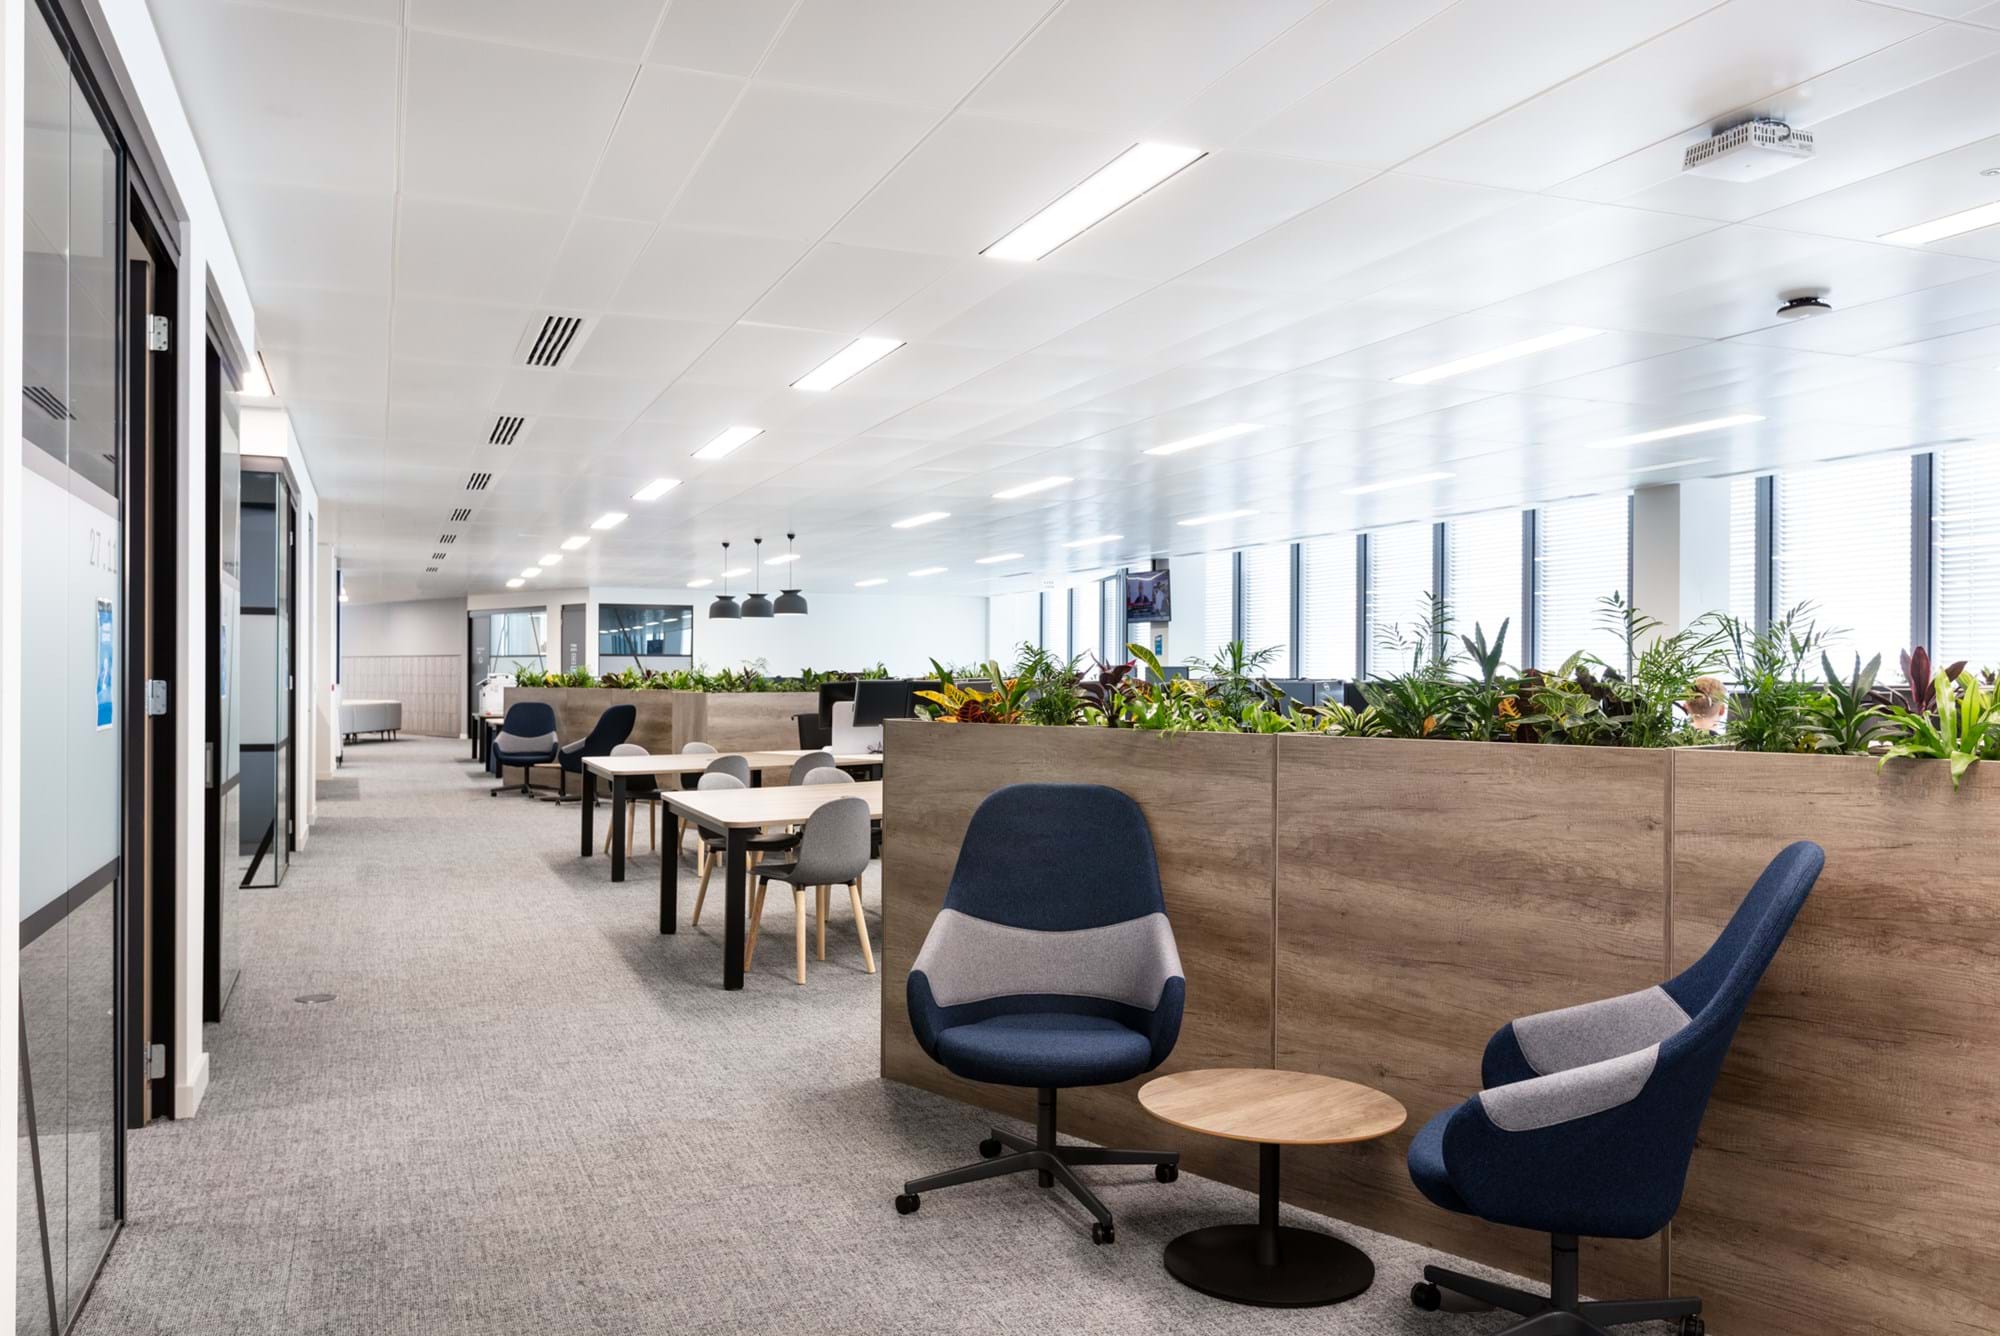 Modus Workspace office design, fit out and refurbishment - Insurance and Risk Management Firm - Modus_Verisk_Day2-15.jpg